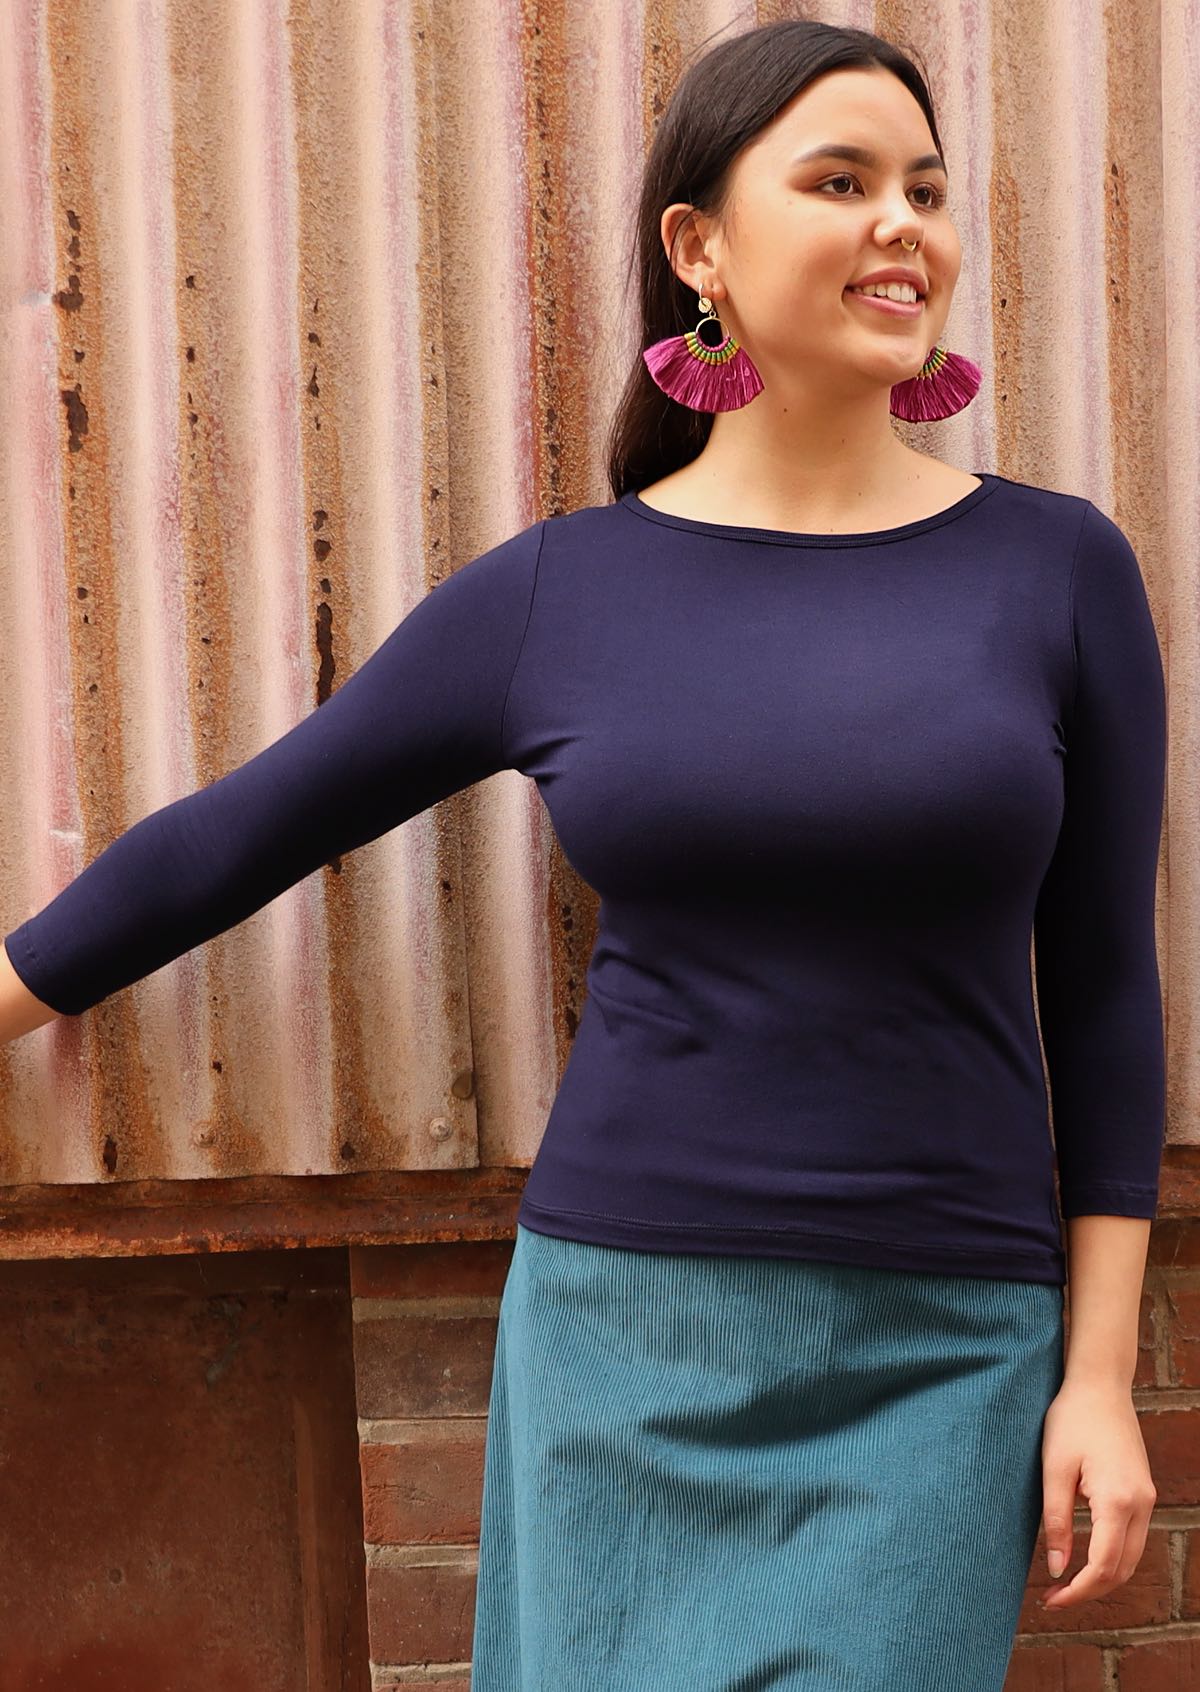 Woman wearing a rayon boat neck navy blue 3/4 sleeve top.